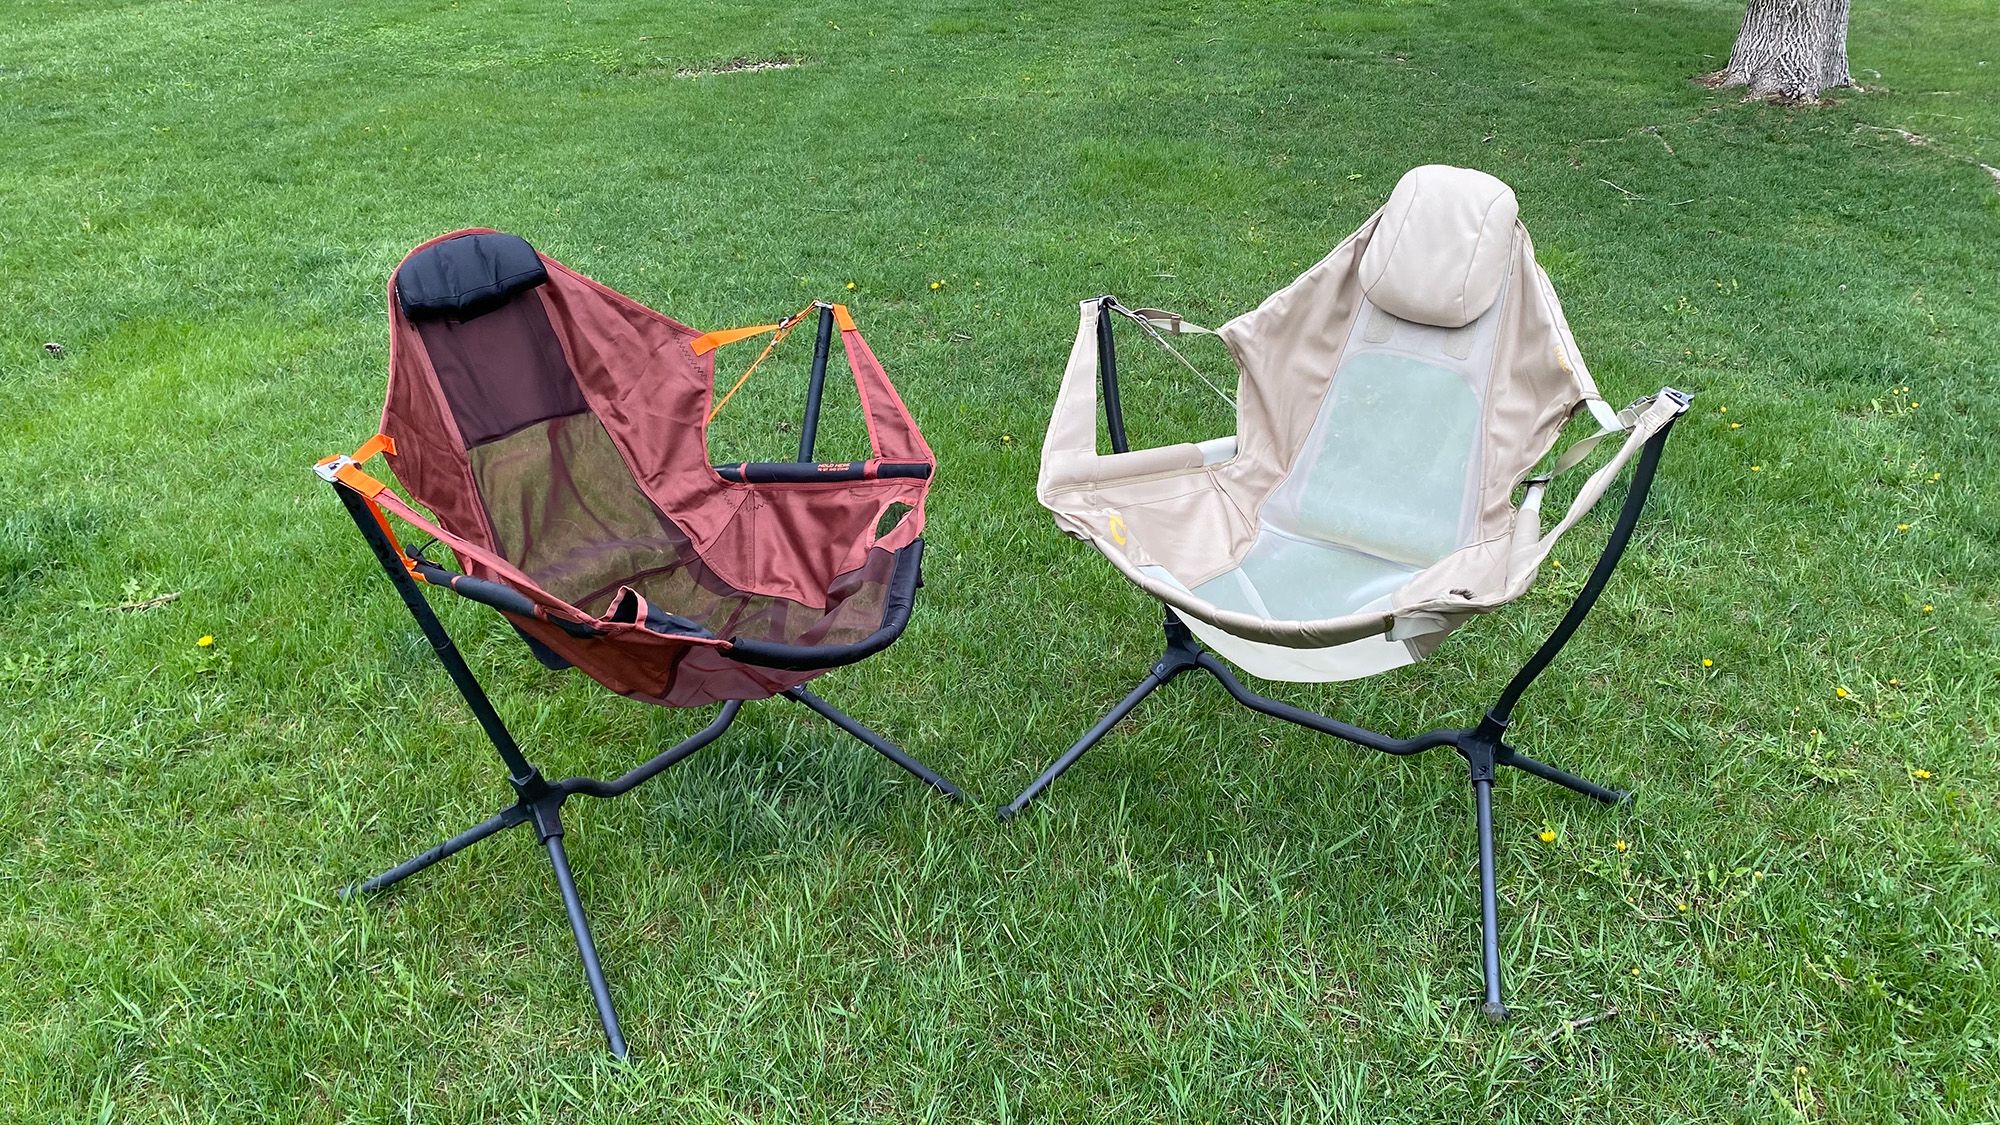 Portable Kids Camping Chair Folding Outdoor Lawn Chair Small